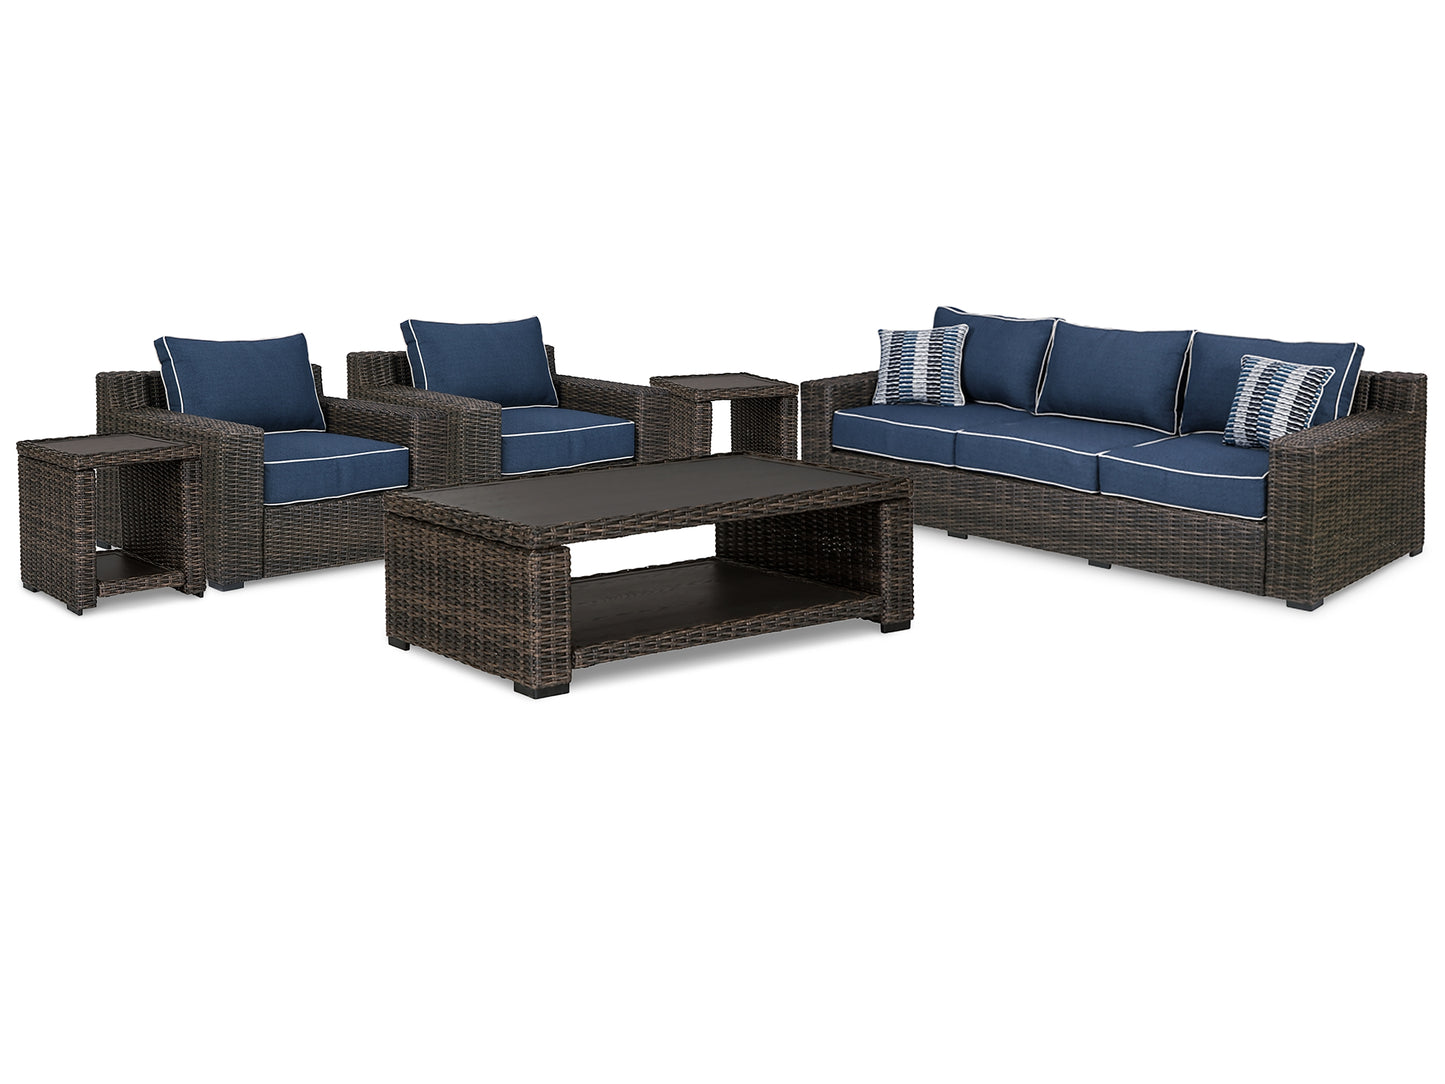 Grasson Lane Outdoor Sofa and  2 Lounge Chairs with Coffee Table and 2 End Tables Wilson Furniture (OH)  in Bridgeport, Ohio. Serving Bridgeport, Yorkville, Bellaire, & Avondale